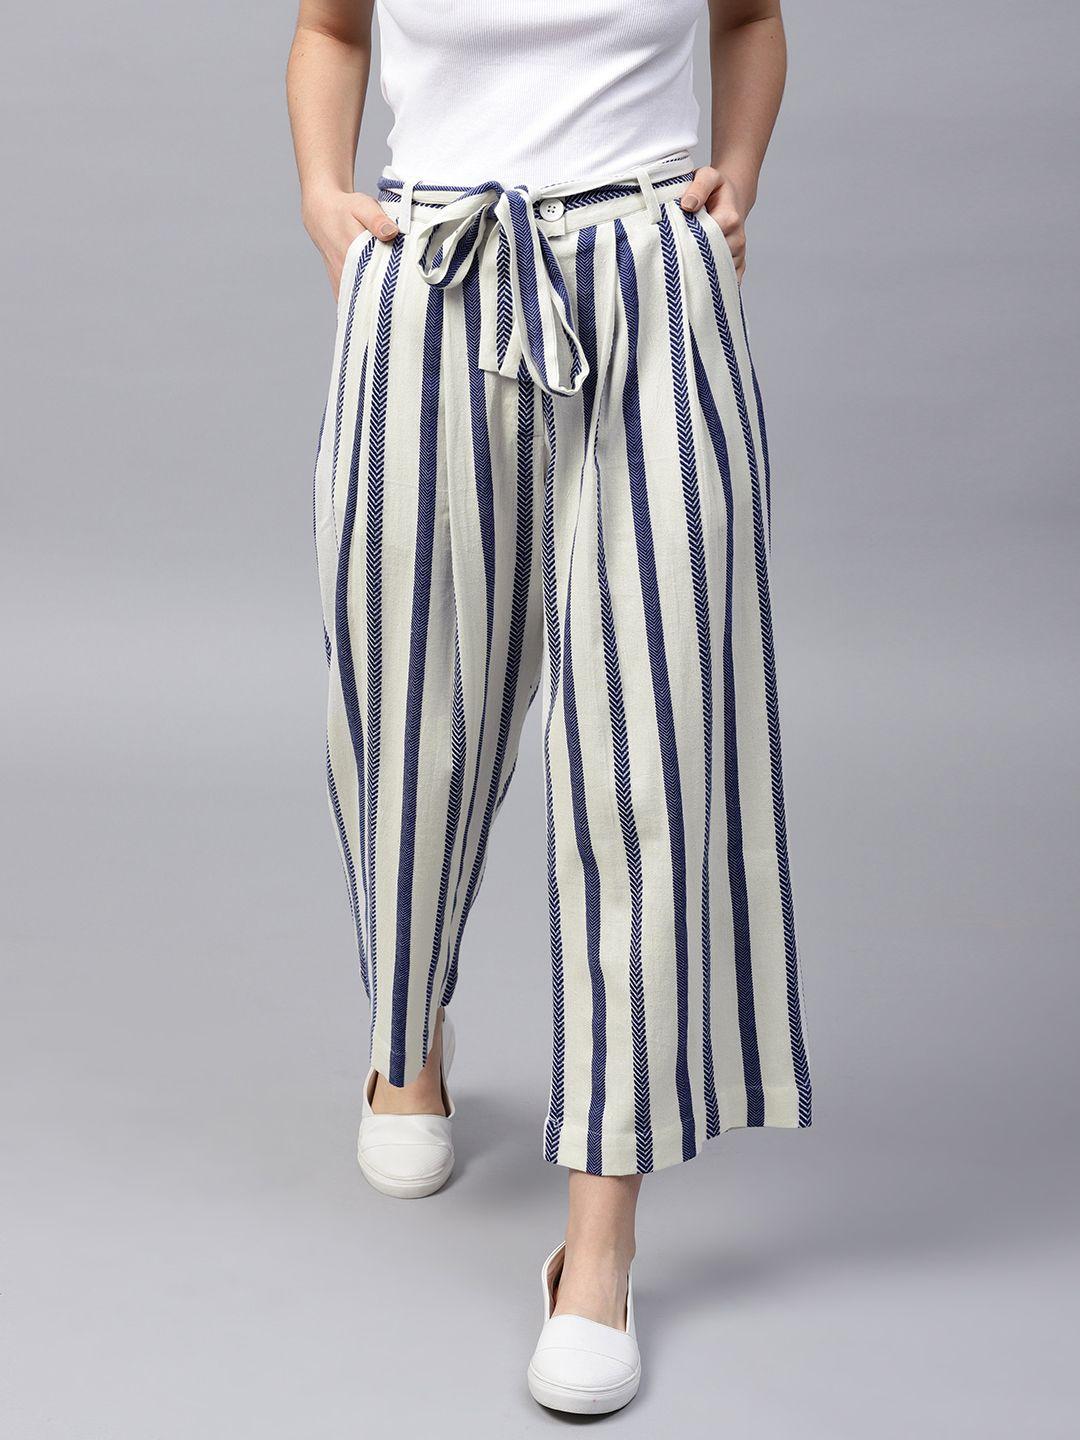 street 9 women white & navy blue loose fit striped culottes